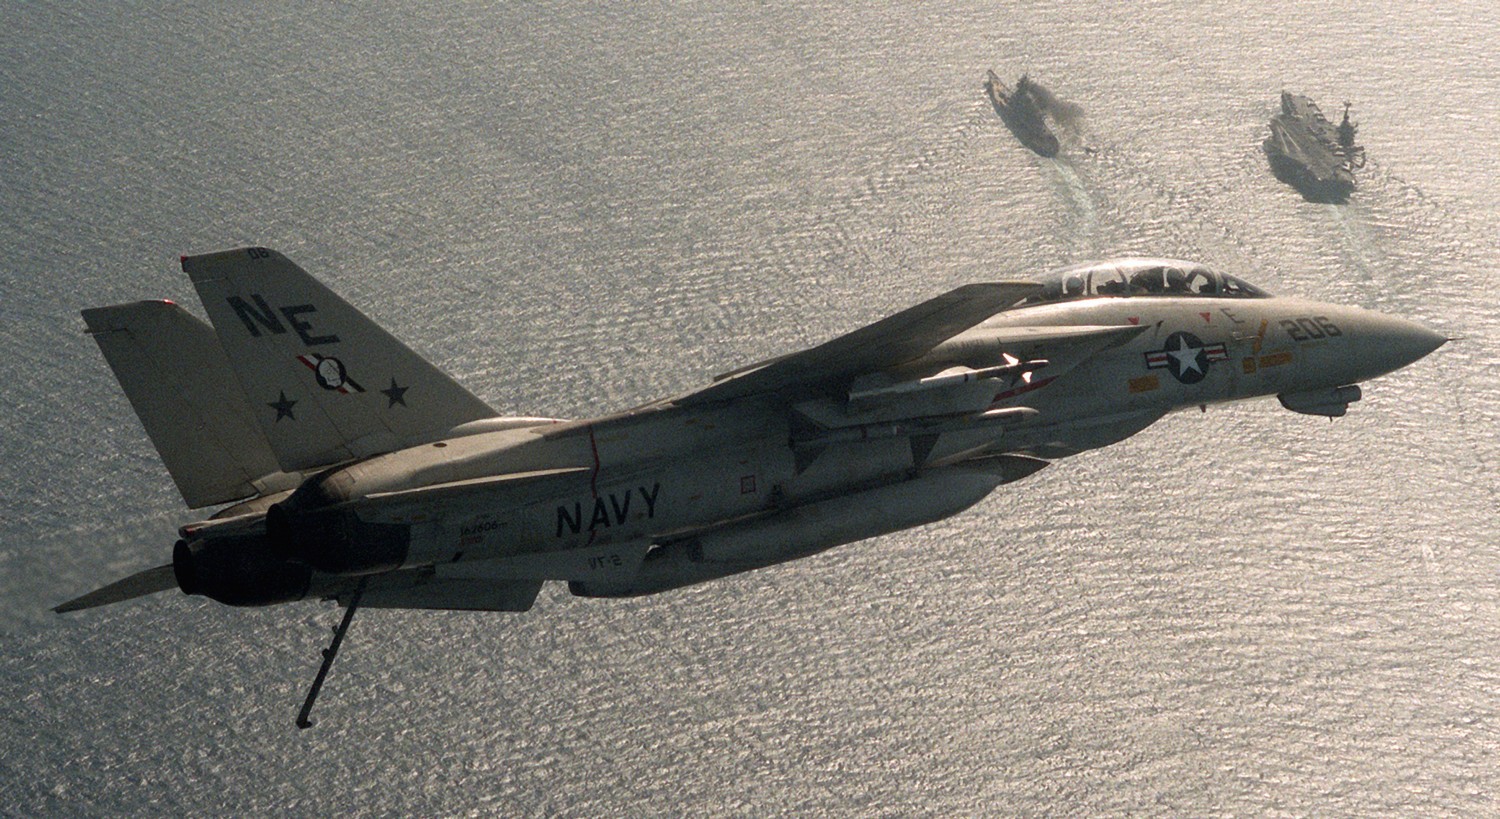 vf-2 bounty hunters fighter squadron fitron f-14a tomcat carrier air wing cvw-2 uss ranger cv-61 71